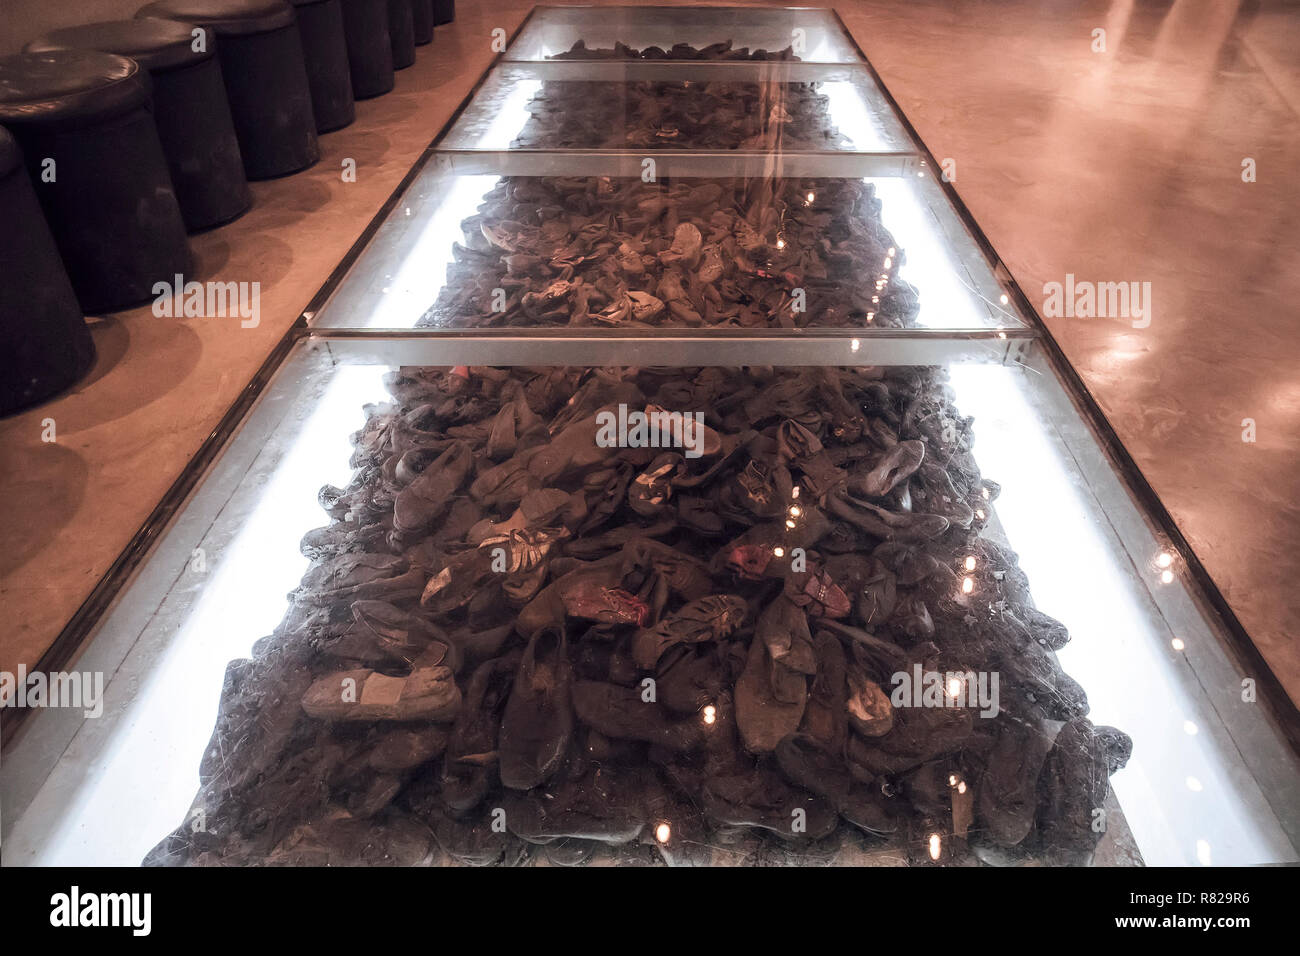 The Hall of Names in the Yad Vashem Holocaust Memorial Site in Jerusalem, Israel, some Shoe remains of the some 6 million Jews murdered during World War ll Stock Photo